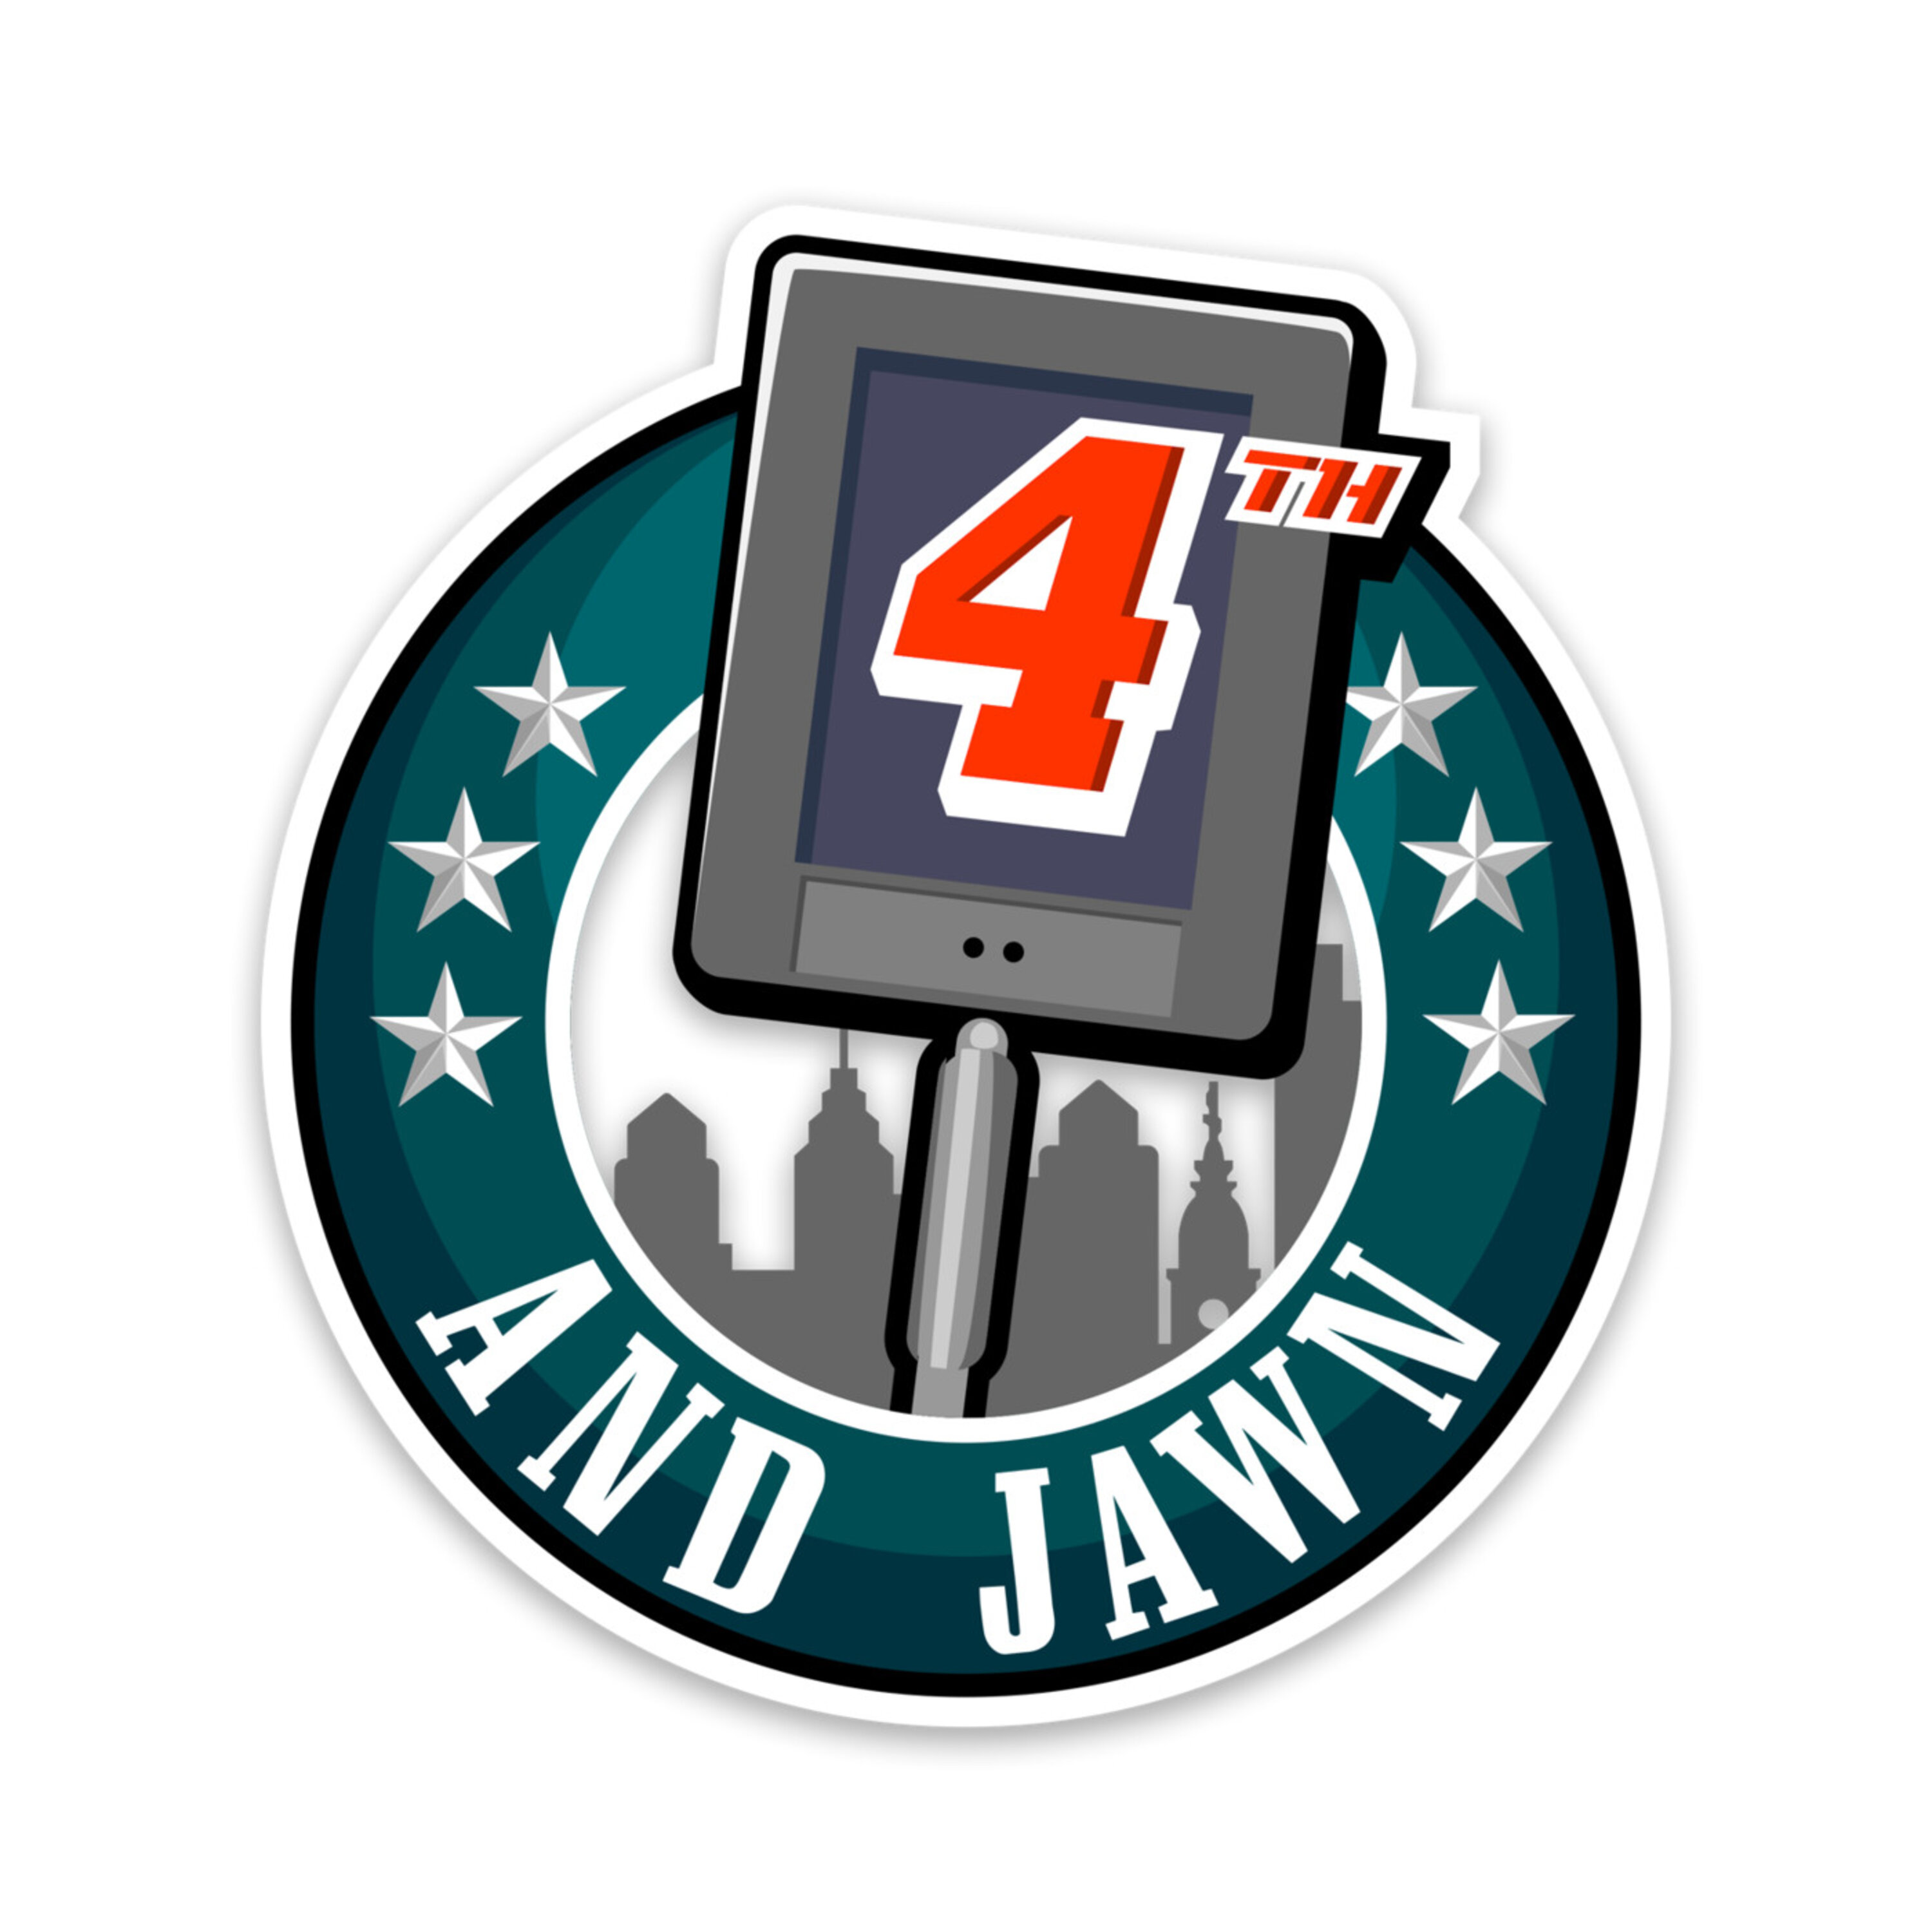 4th and Jawn - Episode 277 - Ray Diddy Retires / James Bradberry Talk